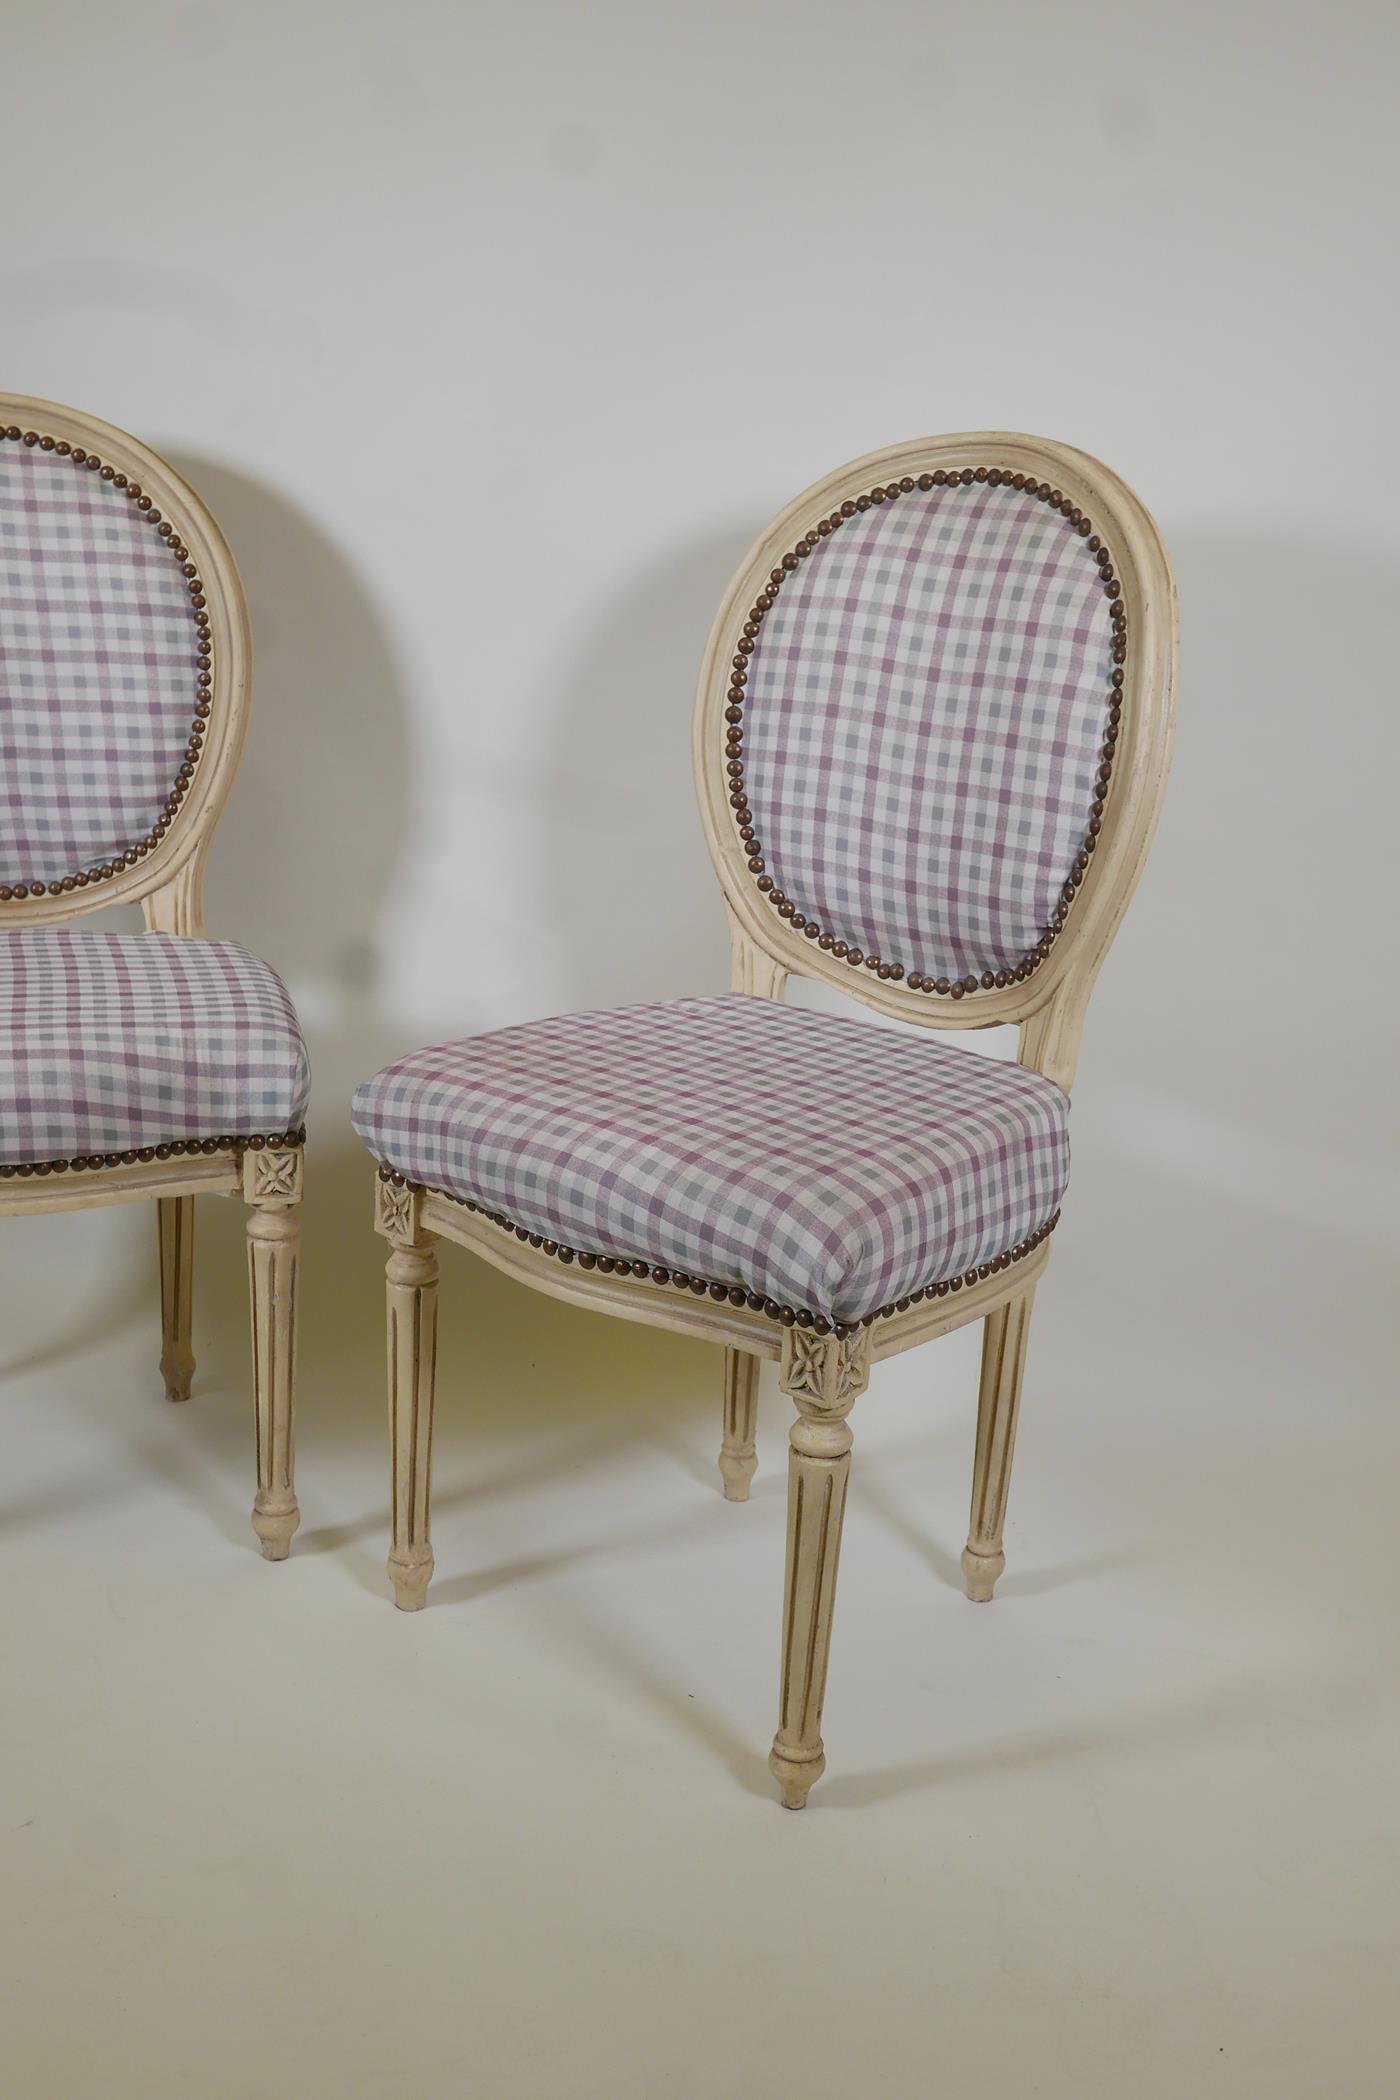 A pair of Louis style side chairs - Image 2 of 2